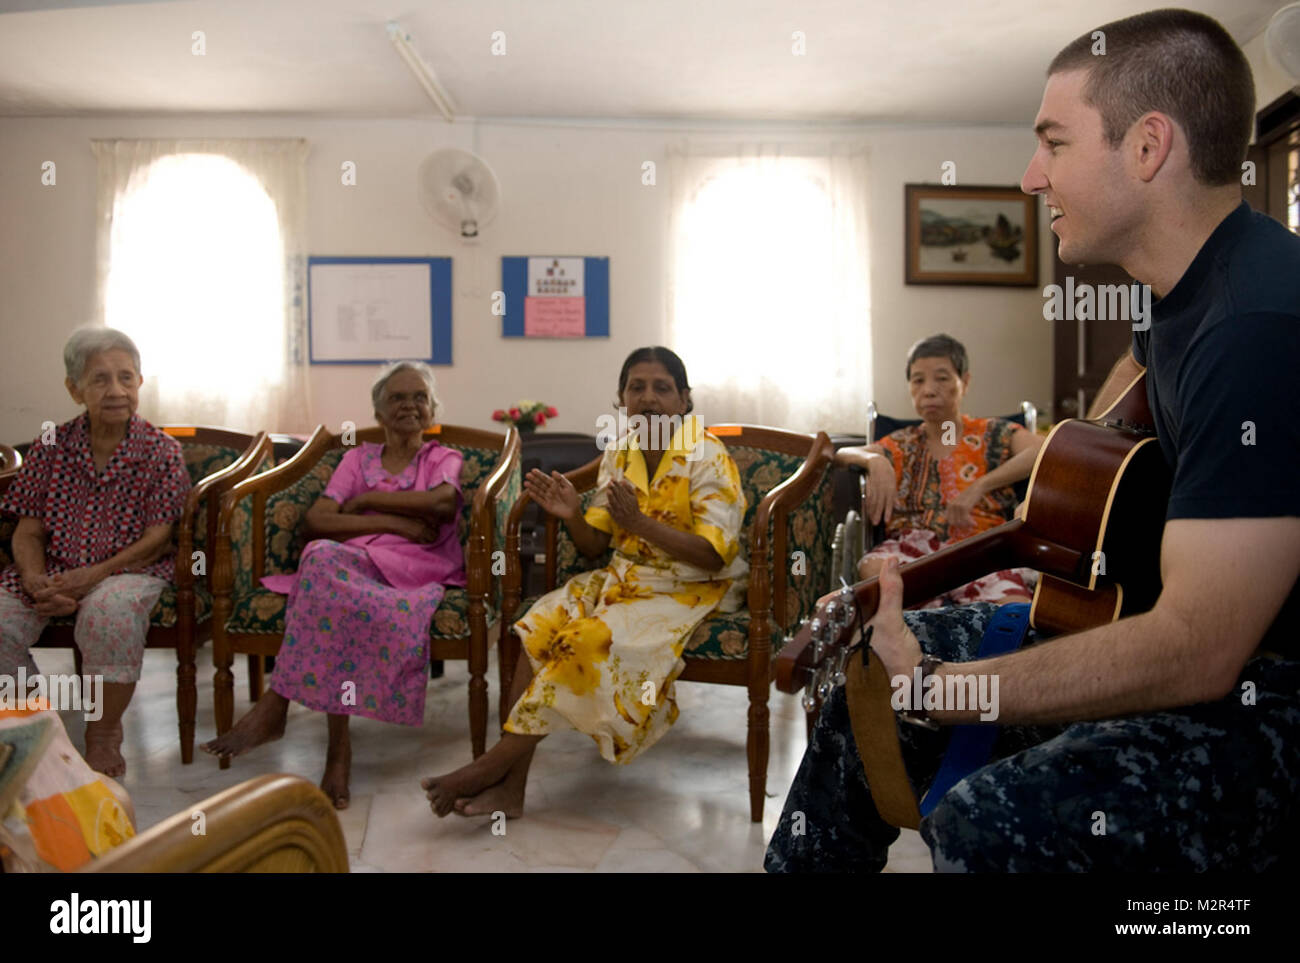 110907-N-JI215-048 KLANG, Malaysia (Sep. 7, 2011) Lt. Paul Oyler, from Paso Robles, Calif., performs worship songs for senior citizens at the Shekinah Senior Citizens' Home in Klang, Malaysia during a community service project. JCSCSG is in Malaysia as part of a scheduled port visit during deployment to the Western Pacific Ocean and Arabian Gulf.  (U.S. Navy photo by Mass Communication Specialist 3rd Class Timothy Aguirre/Released) 110907-N-JI215-048 by #PACOM Stock Photo